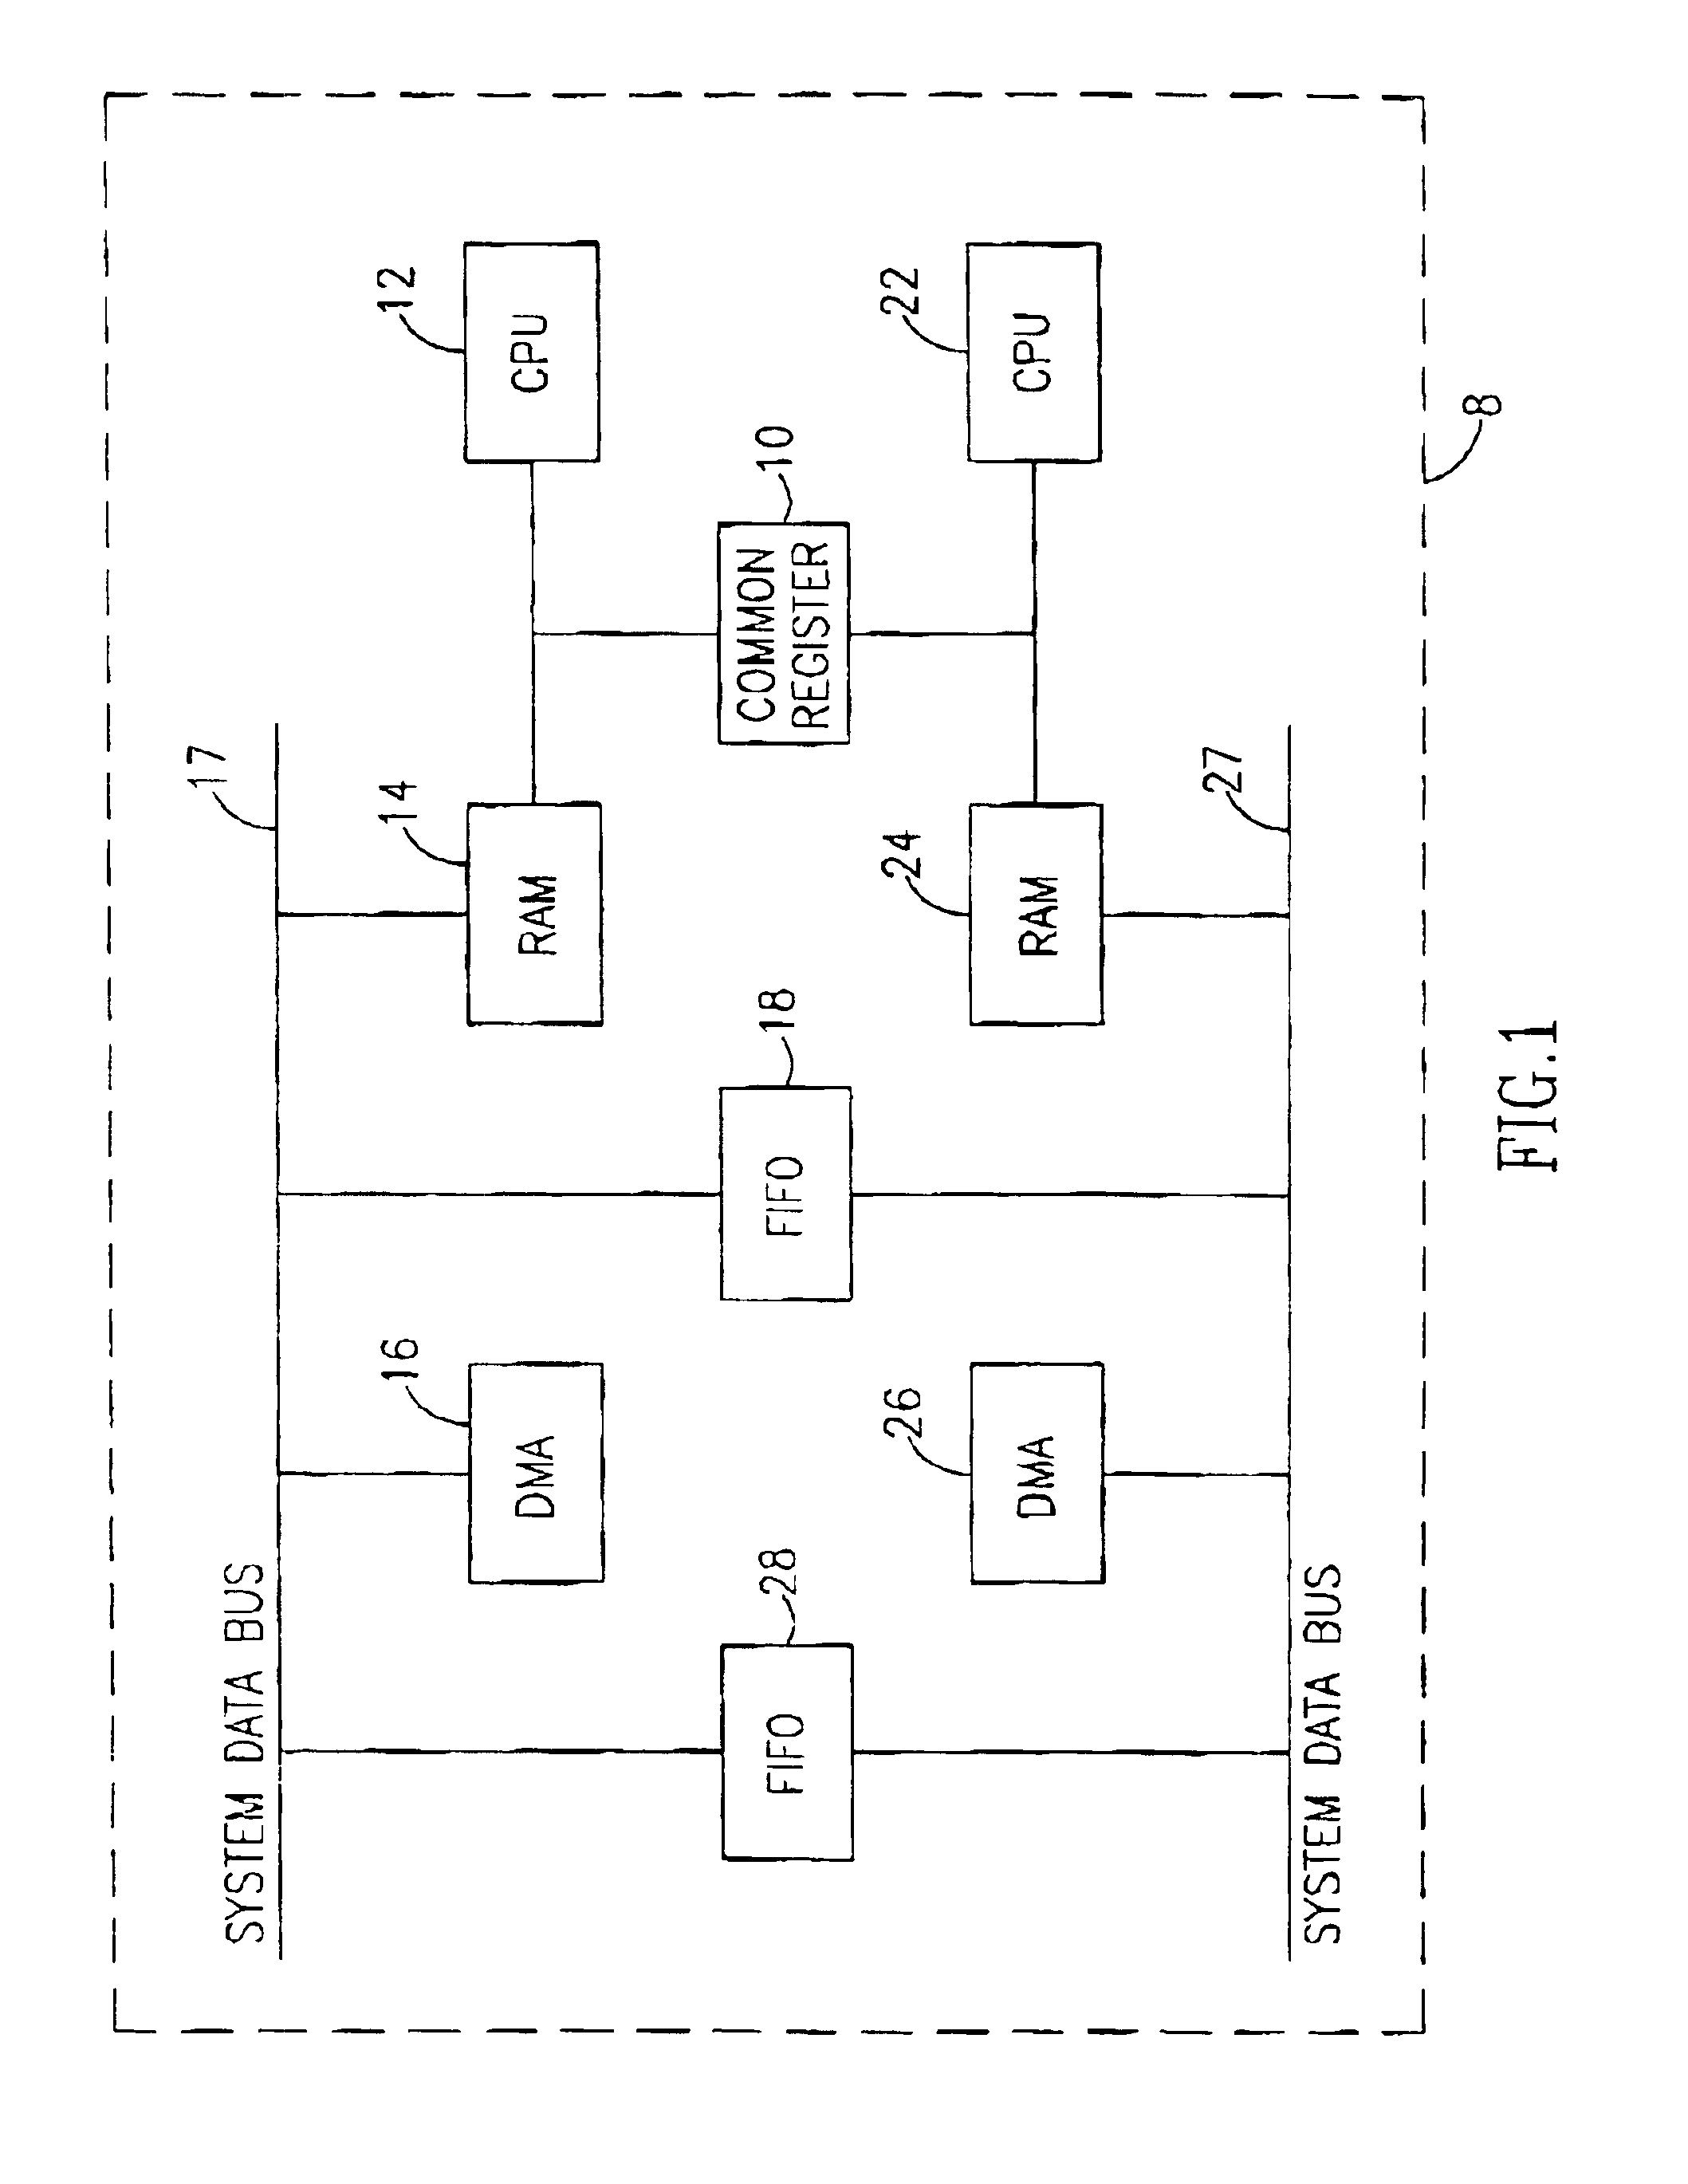 Communication between two embedded processors